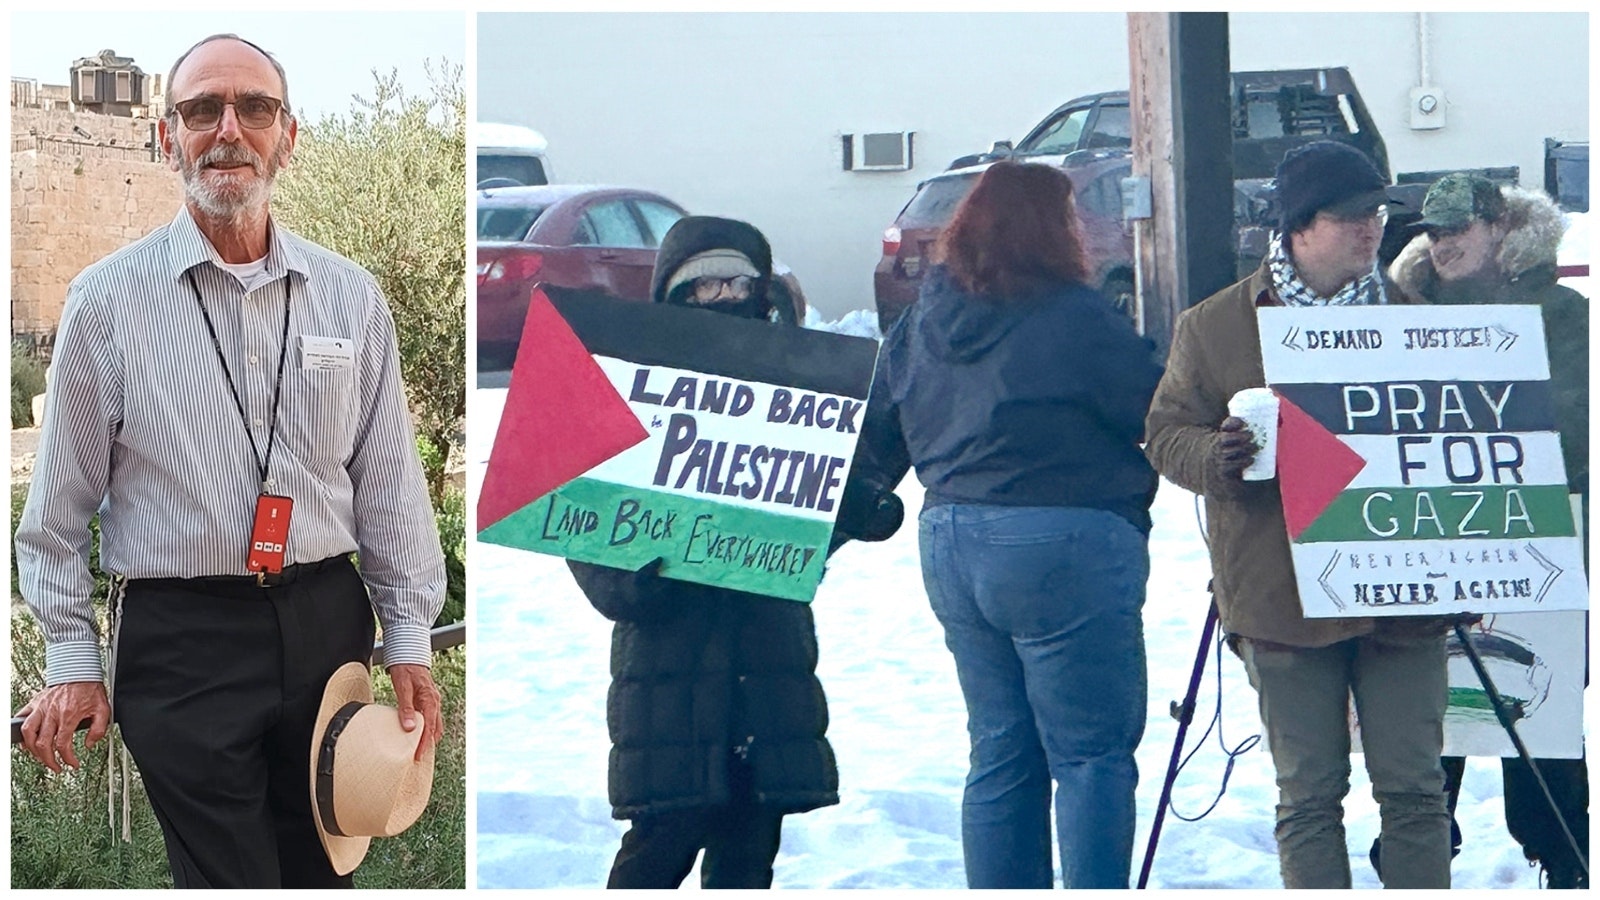 Mike Krampner, a longtime Wyoming resident now living in Jerusalem holds a Ph.D. in Jewish history. He addresses the claims made by a group of Lander pro-Palestinian demonstrators.